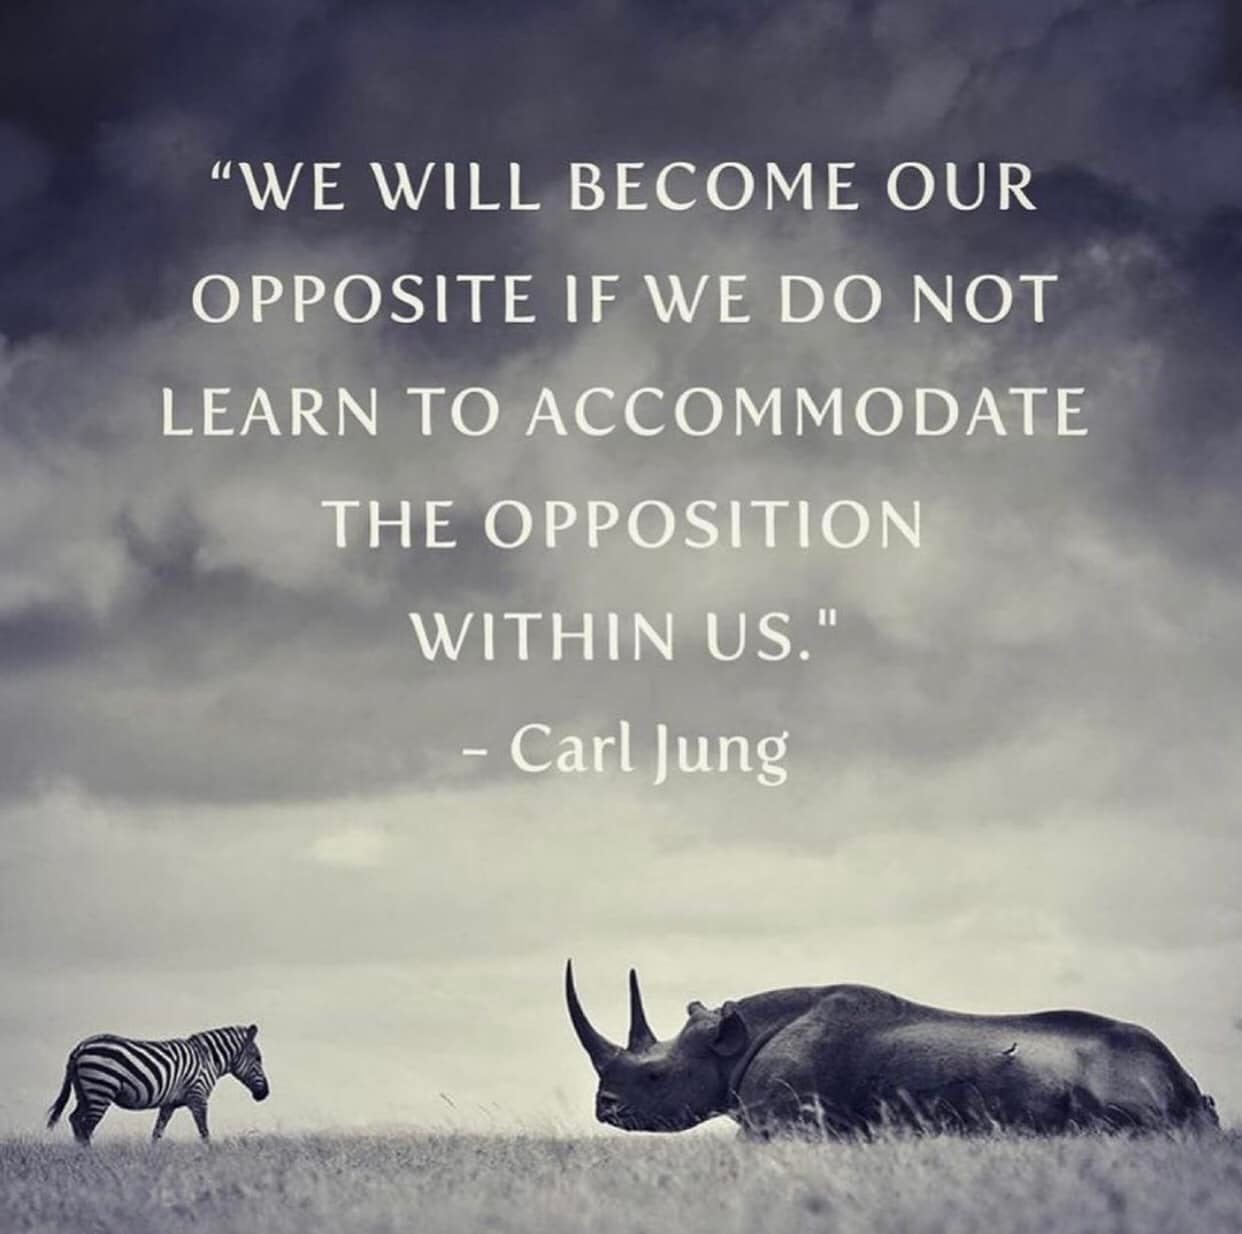 We will become our opposite if we do not learn to accommodate the opposition within us.